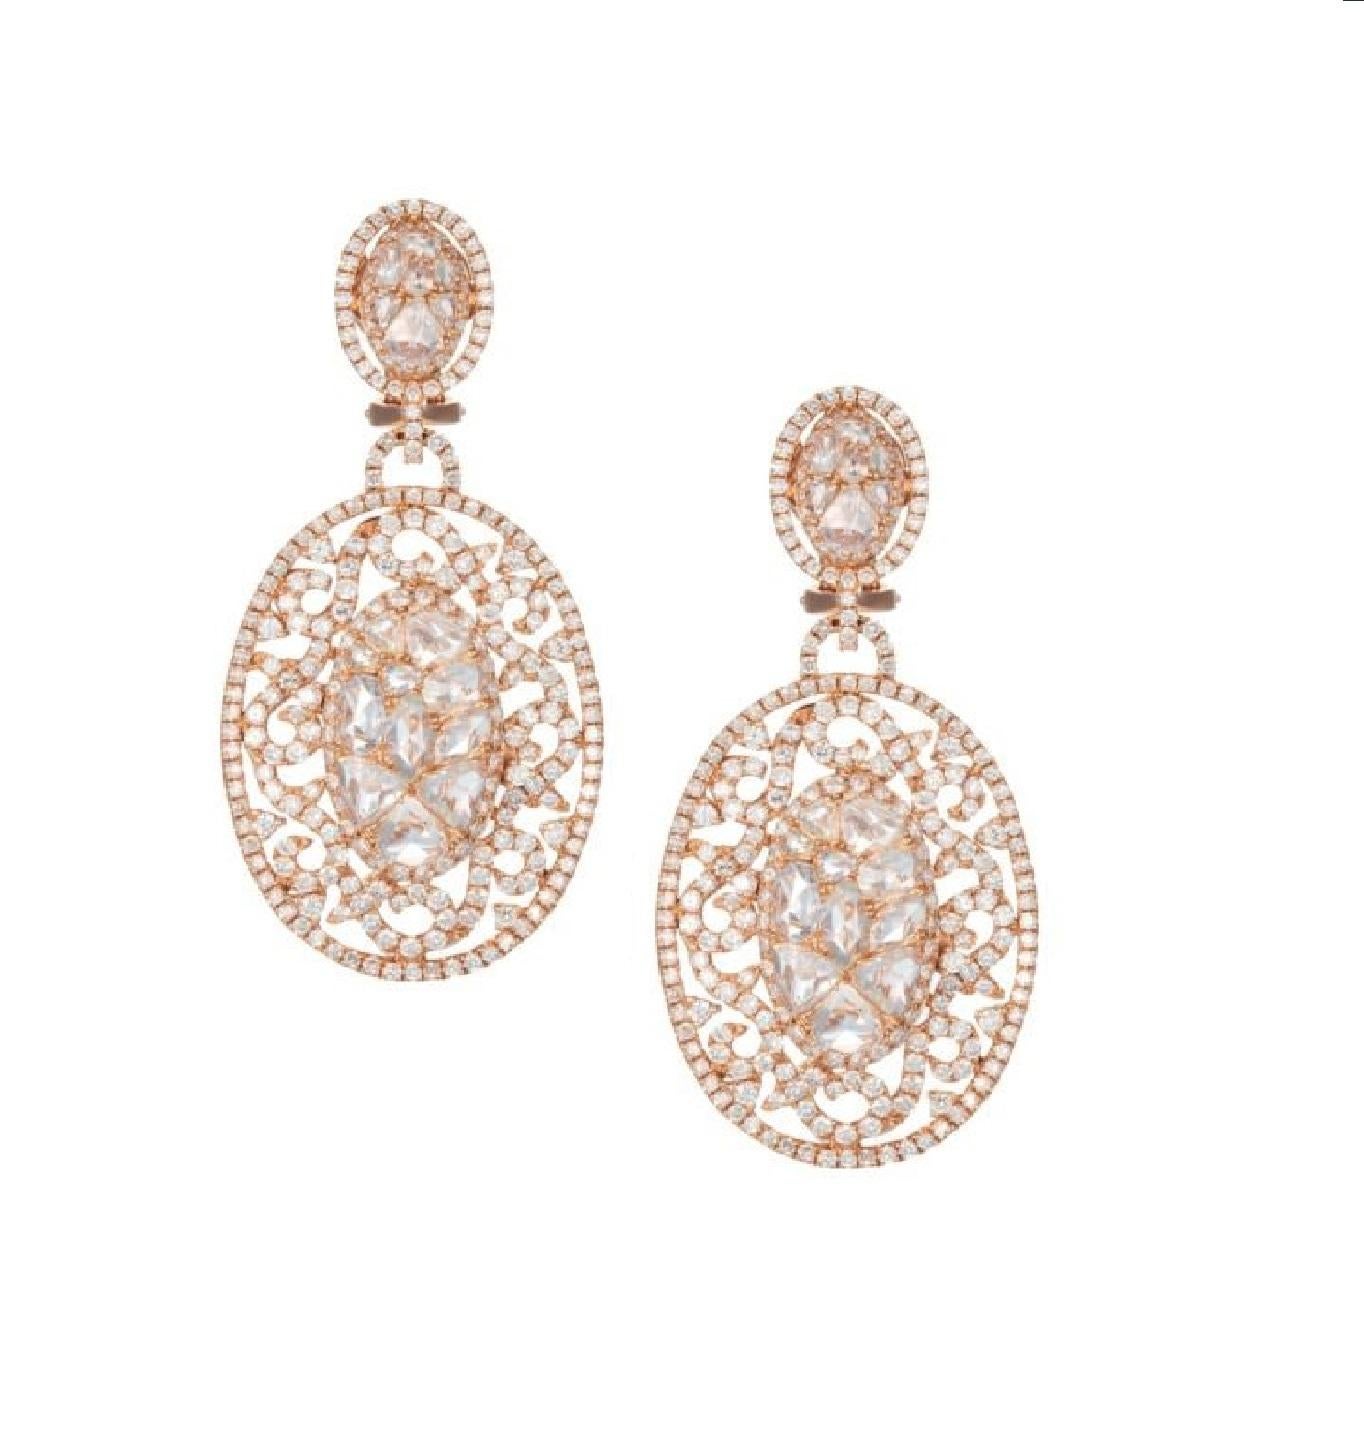 European Cut Diamond Dangle Earrings in Rose Gold
European cut diamond dangle earrings
18K rose gold dangle earrings with 8.50 carats of European cut diamonds and brilliant cut diamonds. 
Diamond specifications:

F/G color, SI clarity

This product